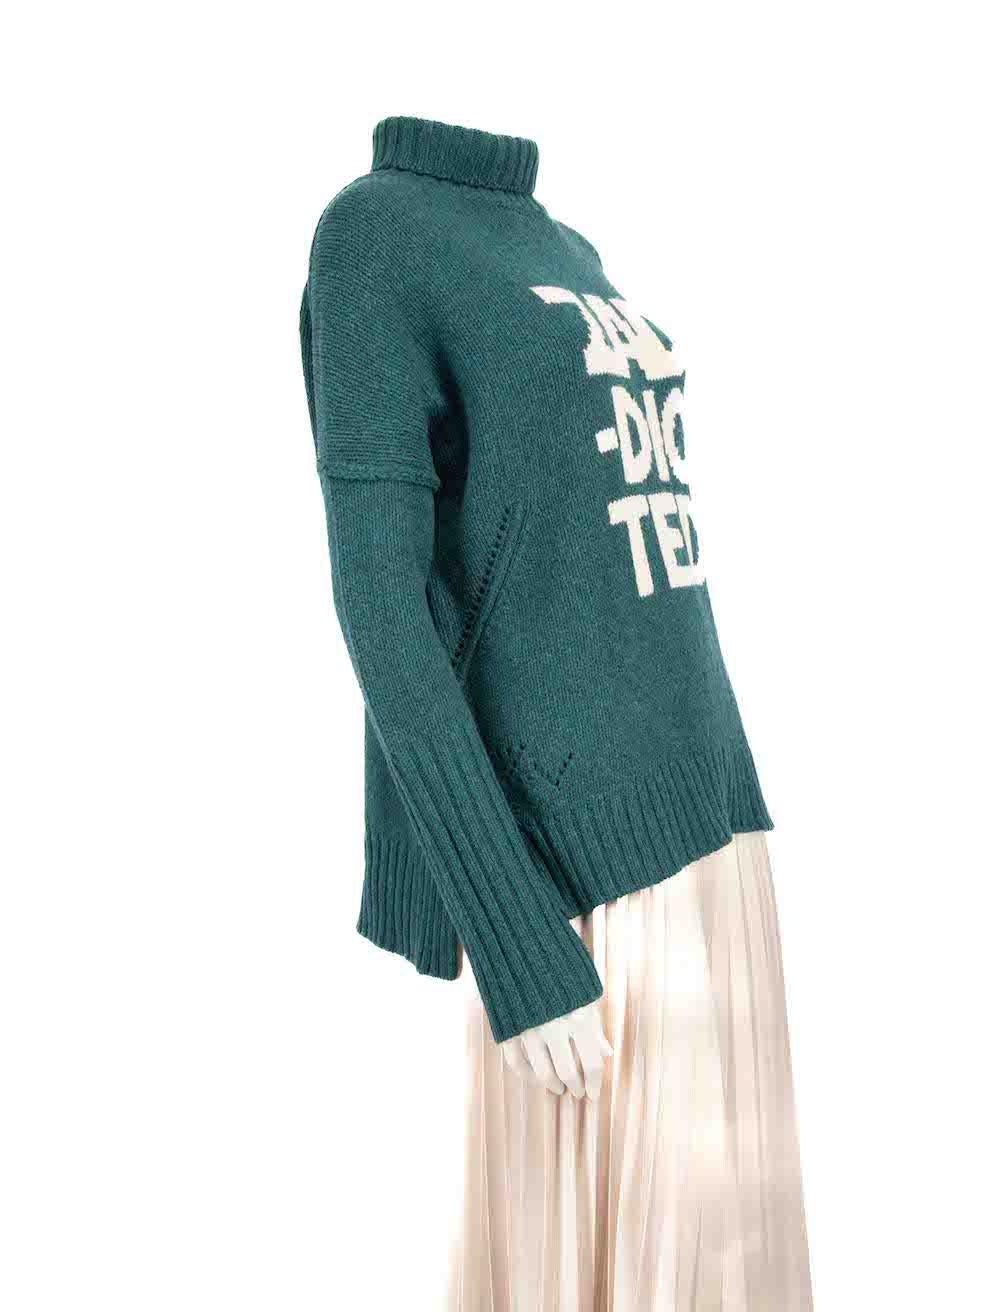 CONDITION is Very good. Minimal wear to the jumper is evident. Minimal discolouration to the front on this used Zadig & Voltaire designer resale item.
 
 
 
 Details
 
 
 Green
 
 Merino wool
 
 Knit jumper
 
 Turtleneck
 
 'Zaddicted' Knit front
 
